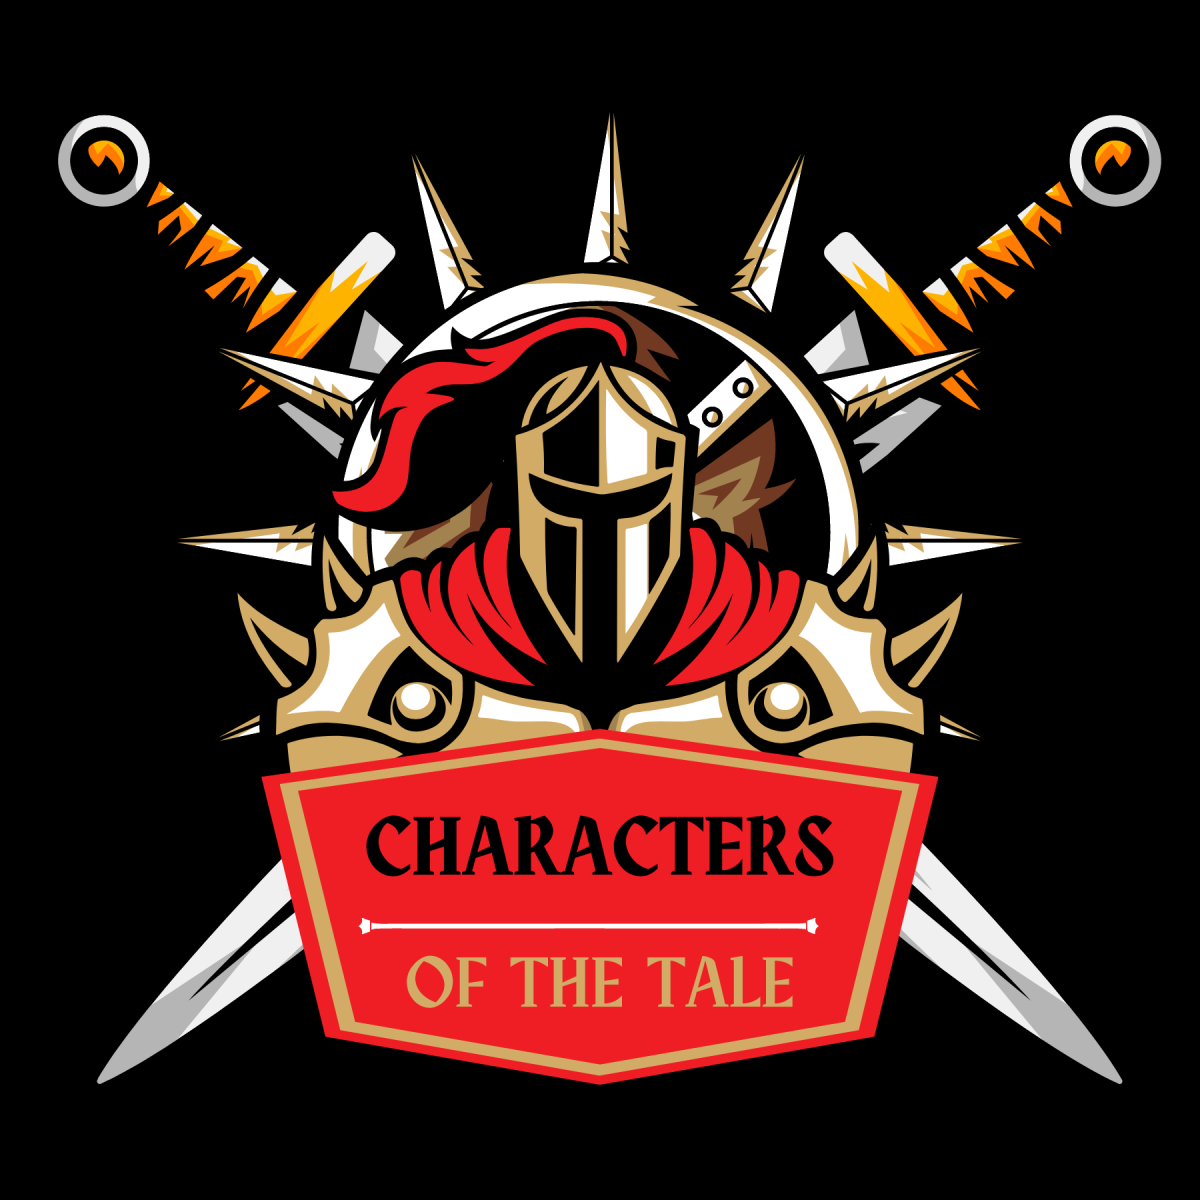 Characters of the Tale